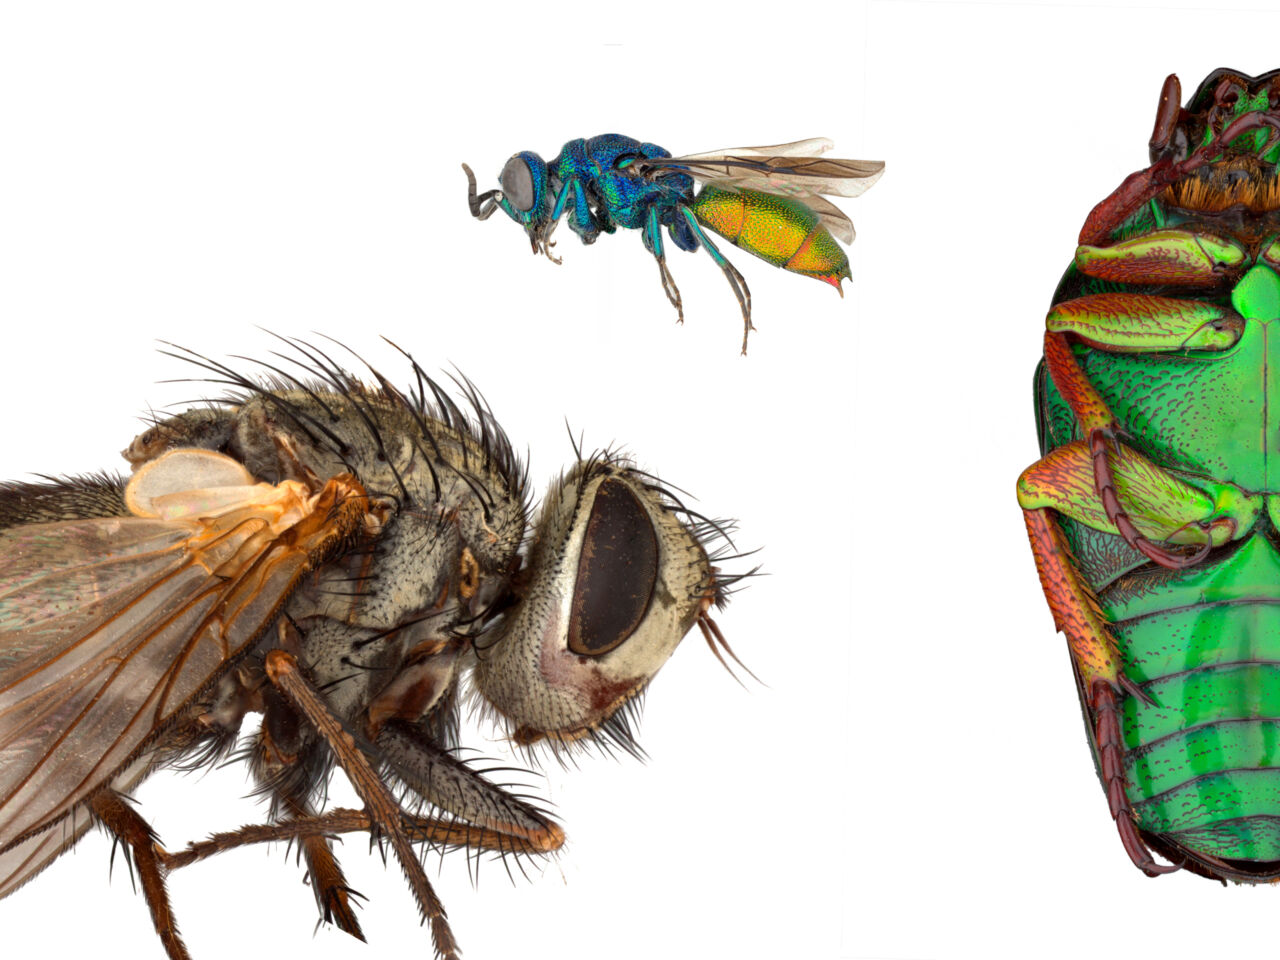 3D Models of insects